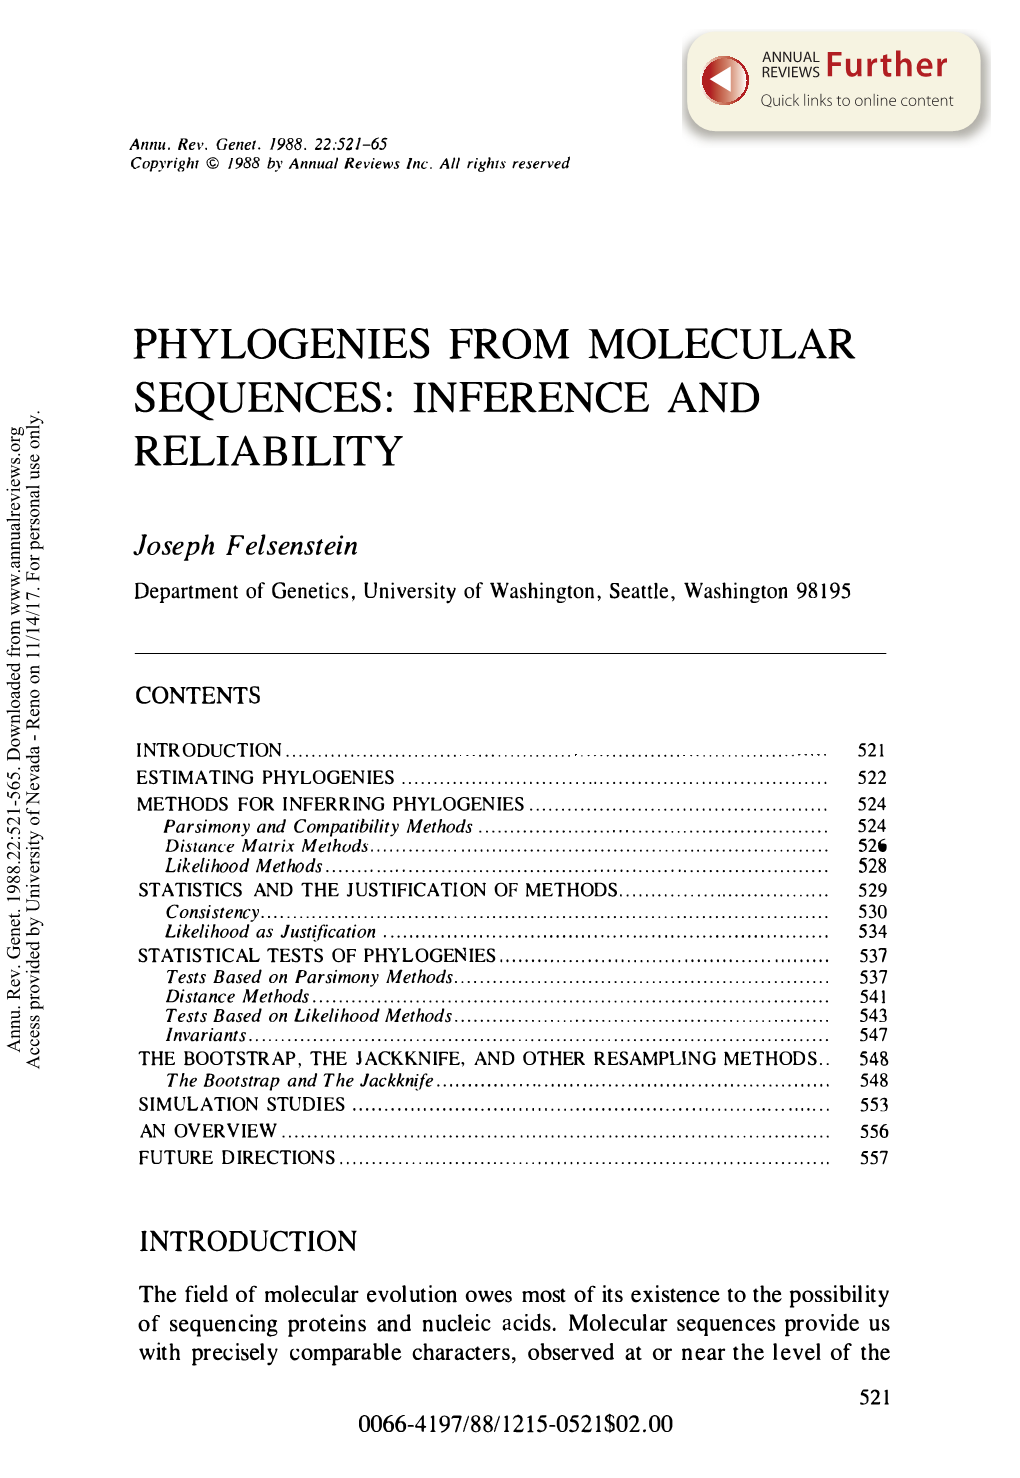 Phylogenies from Molecular Sequences: Inference and Reliability